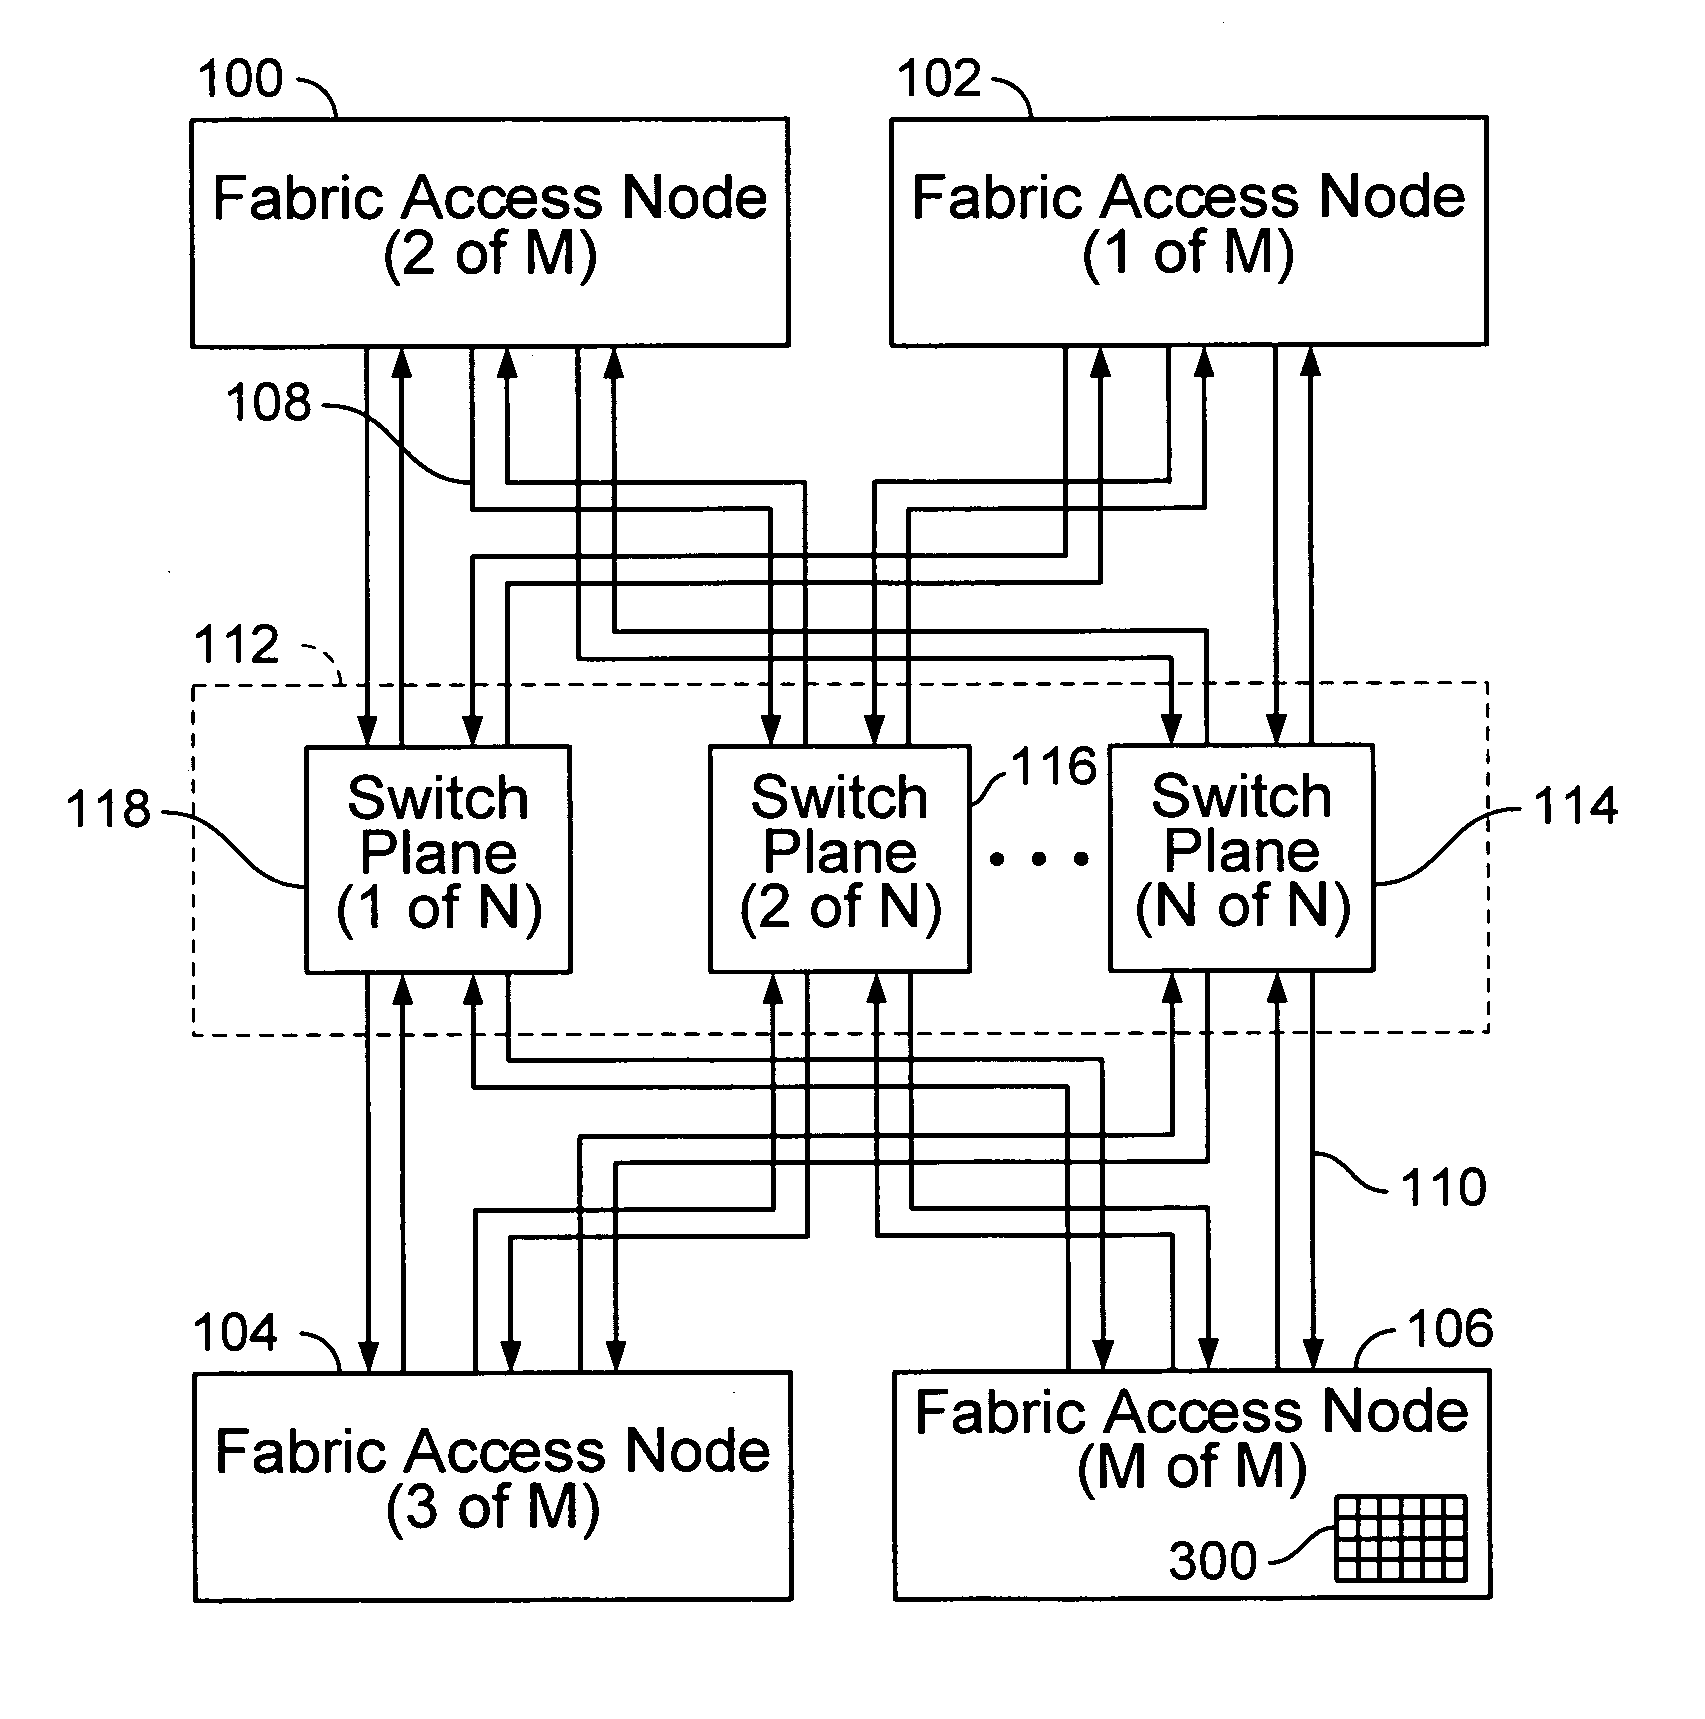 Fabric access integrated circuit configured to bound cell reorder depth